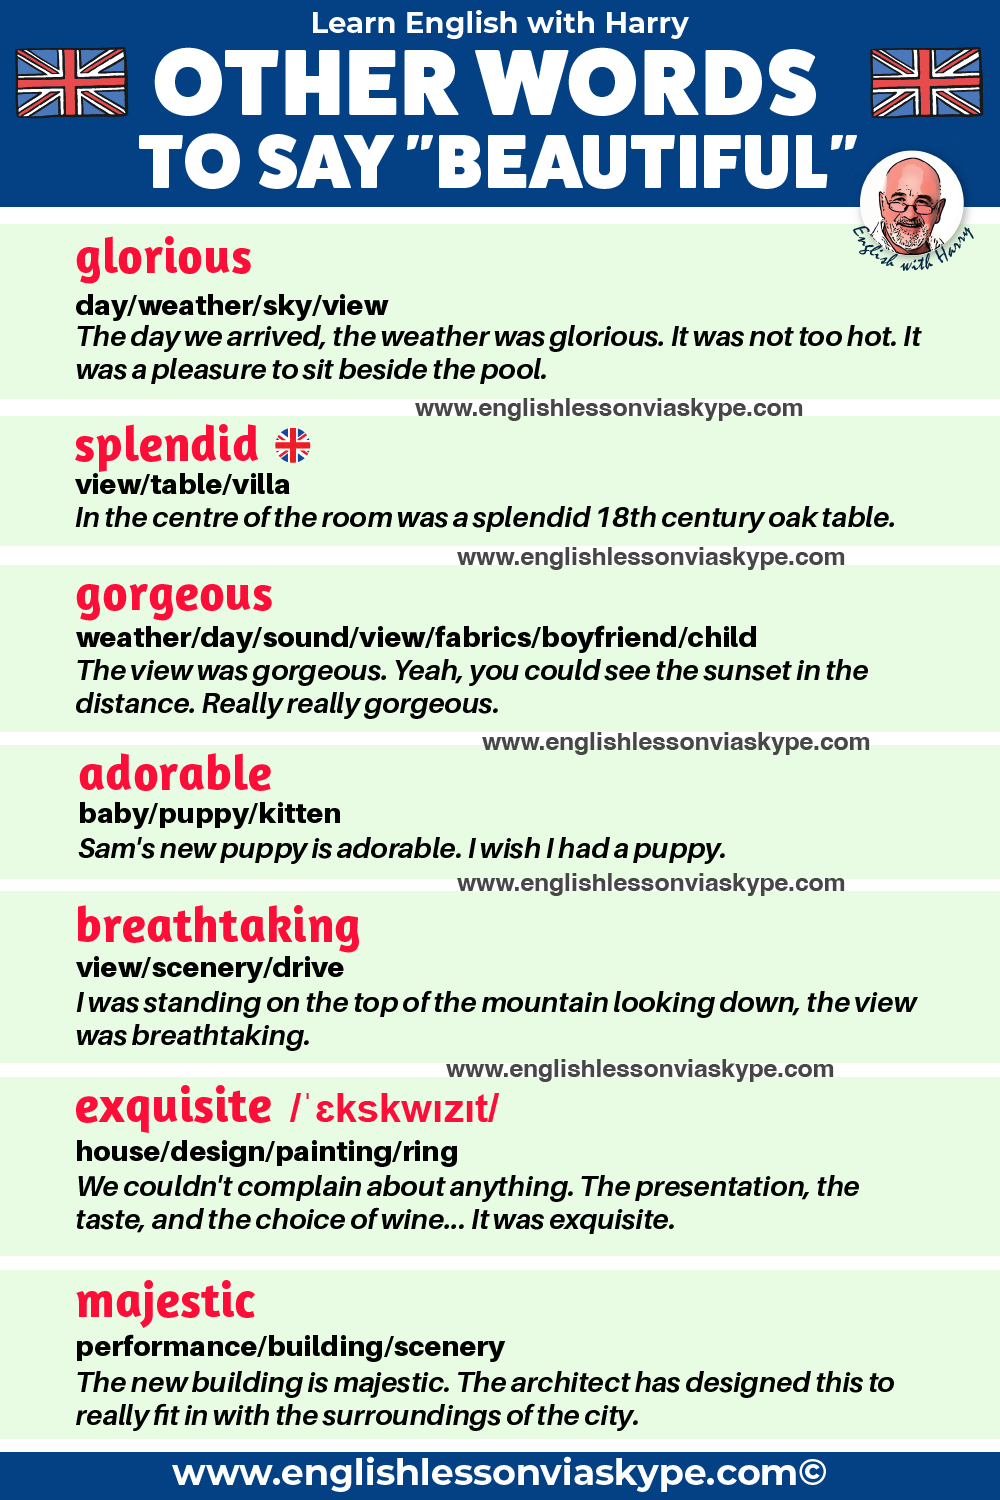 Other ways to say beautiful in English. Online English lessons on Zoom and Skype. Click the link and book your free trial lesson at englishlessonviaskype.com #learnenglish